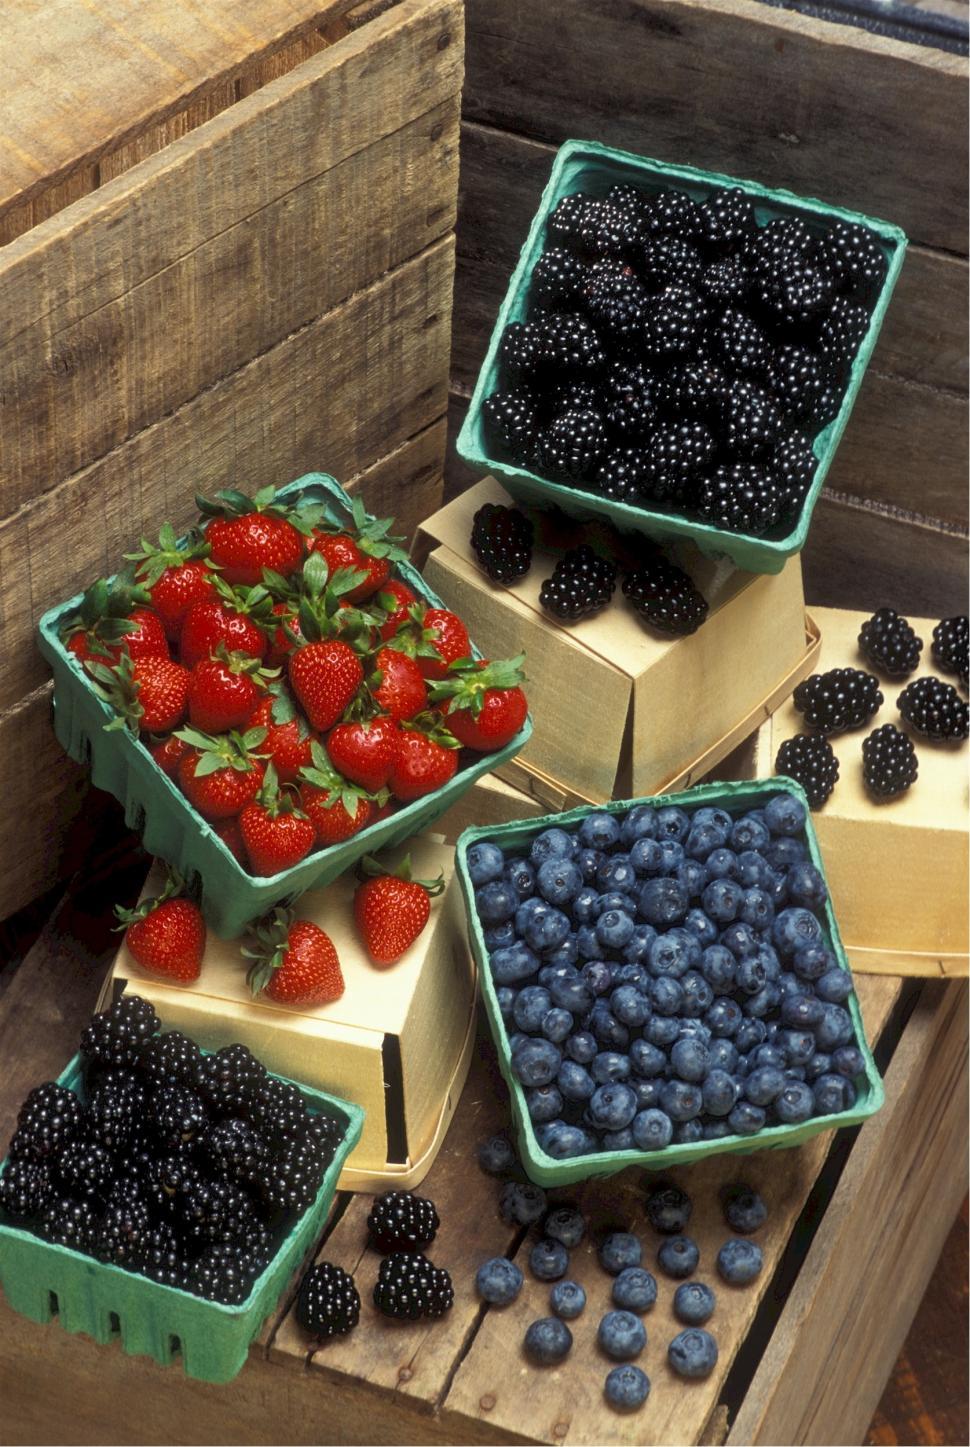 Free Image of A Pile of Boxes Filled With Different Types of Fruit 